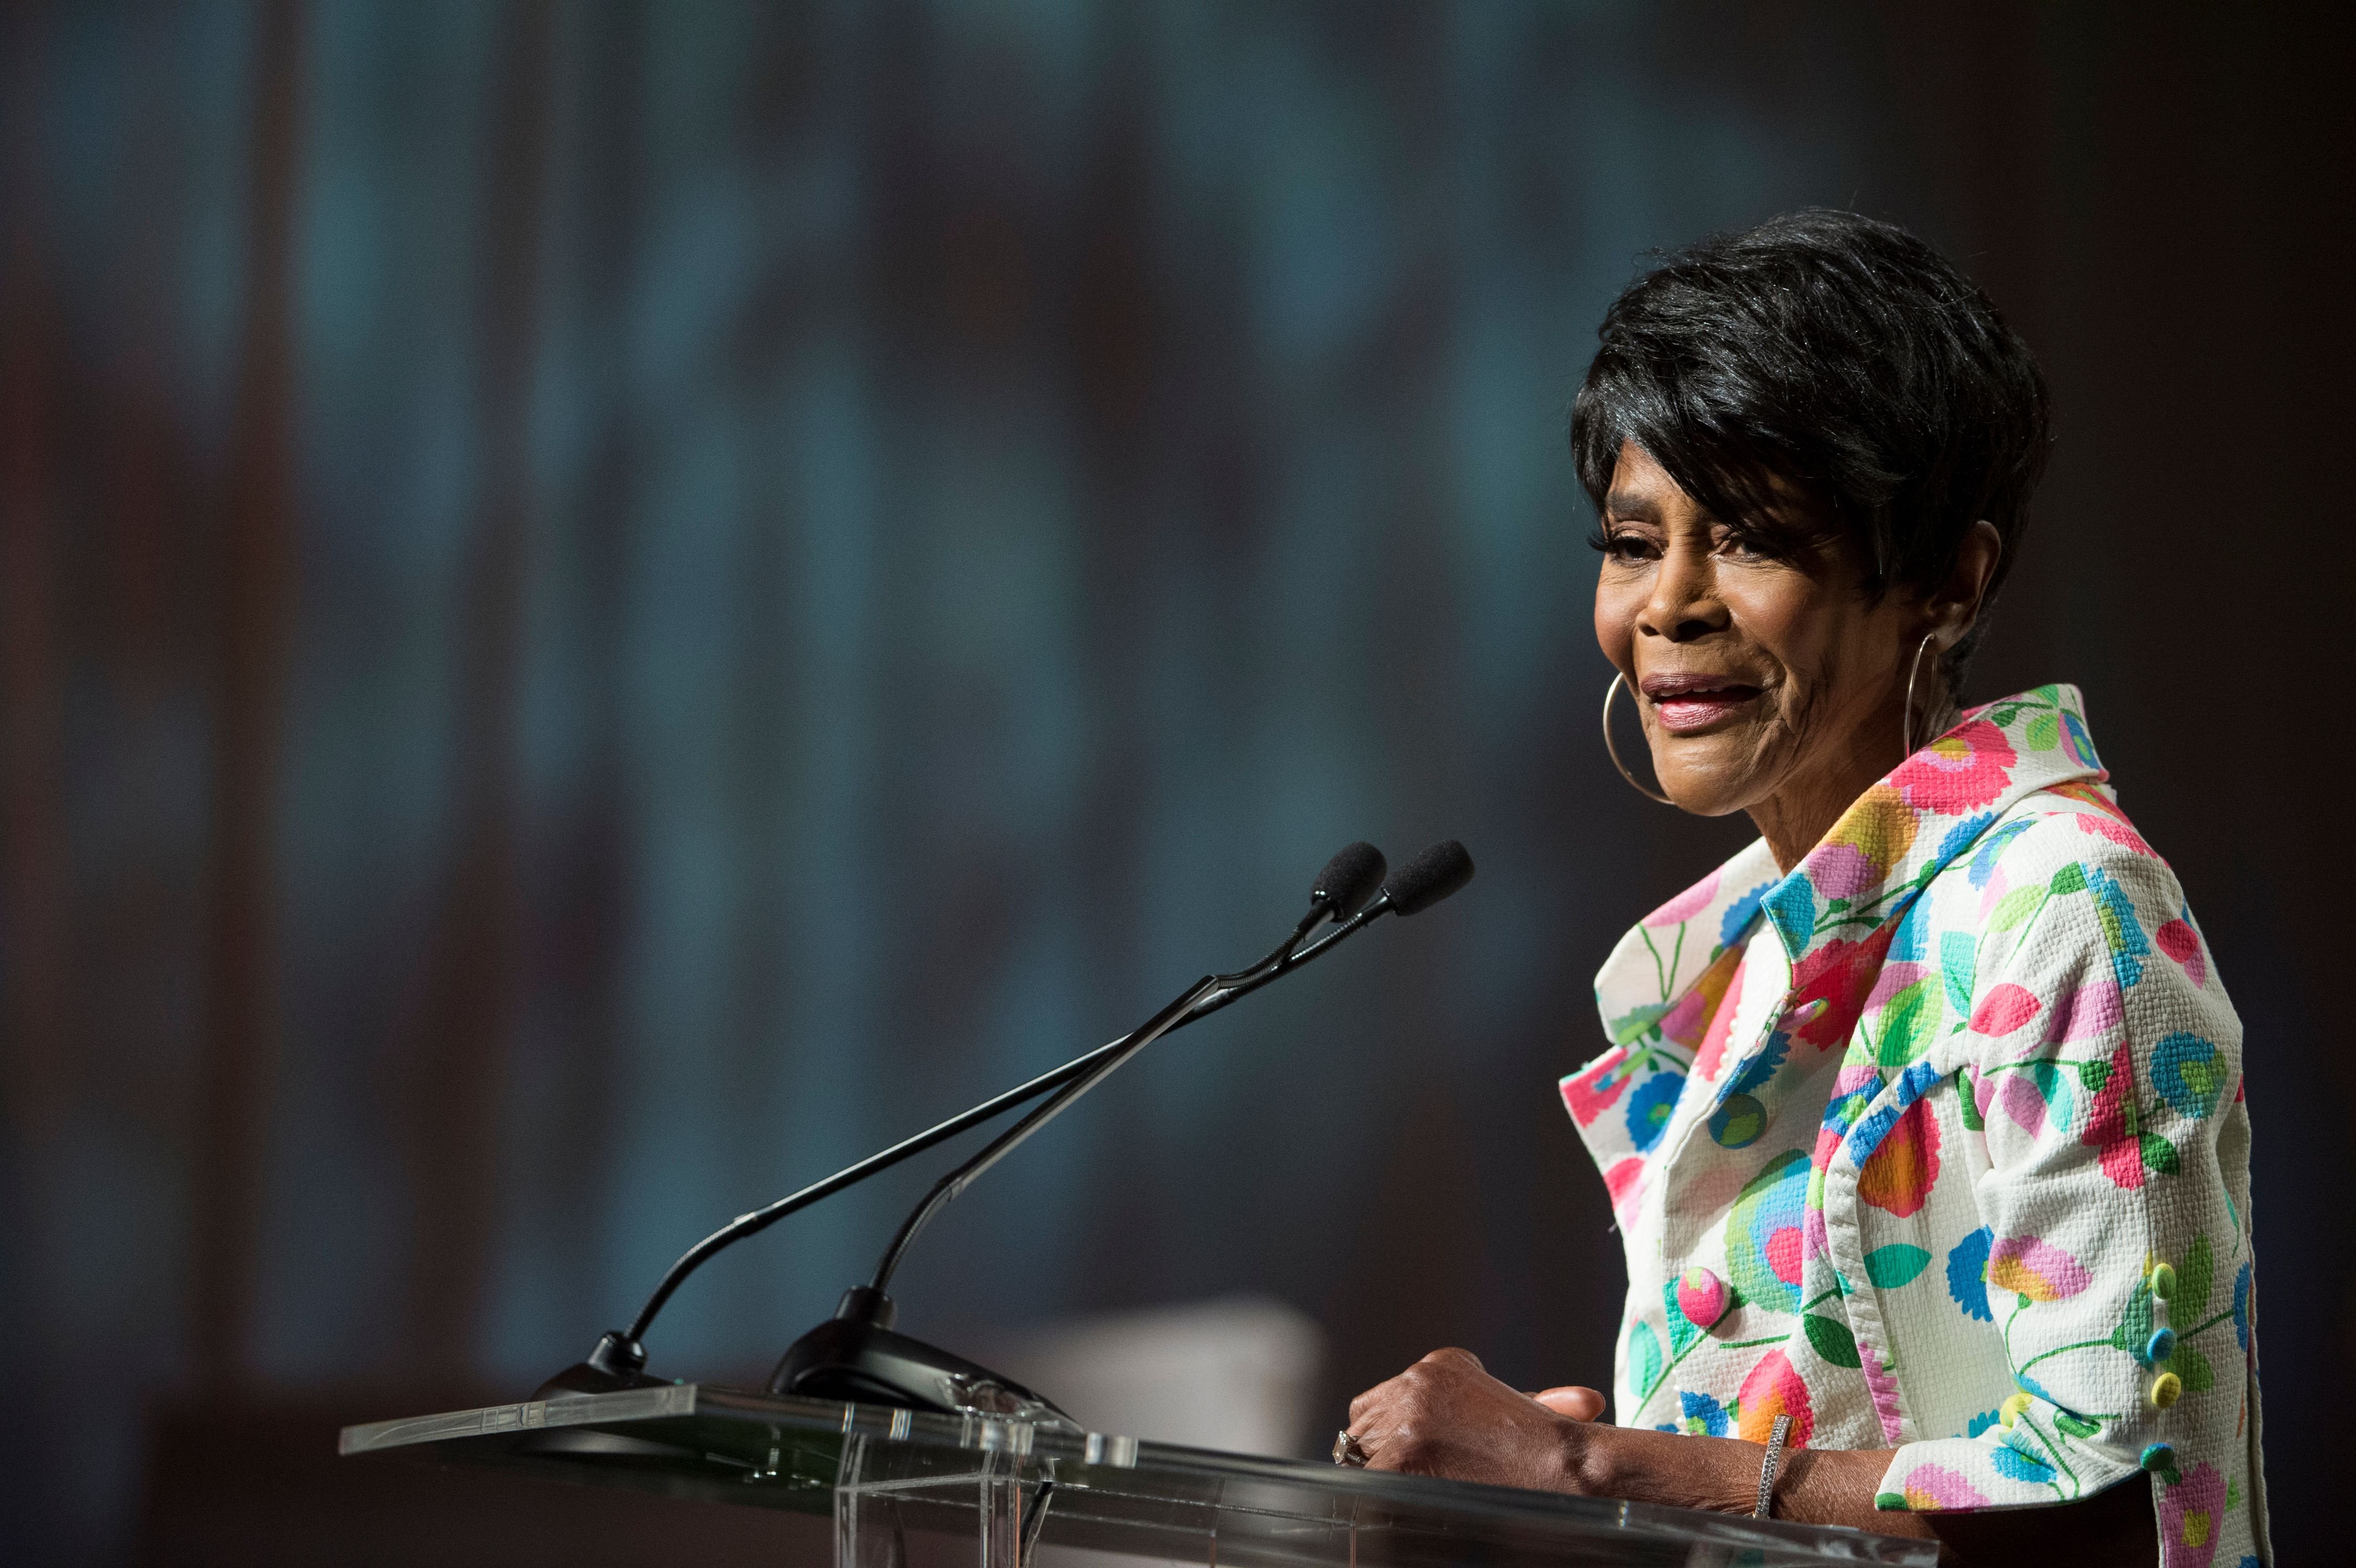 Cicely Tyson receives the Legends Award at MegaFest's International Faith & Family Film Festival at Omni Hotel on June 30, 2017. | Photo: Getty Images